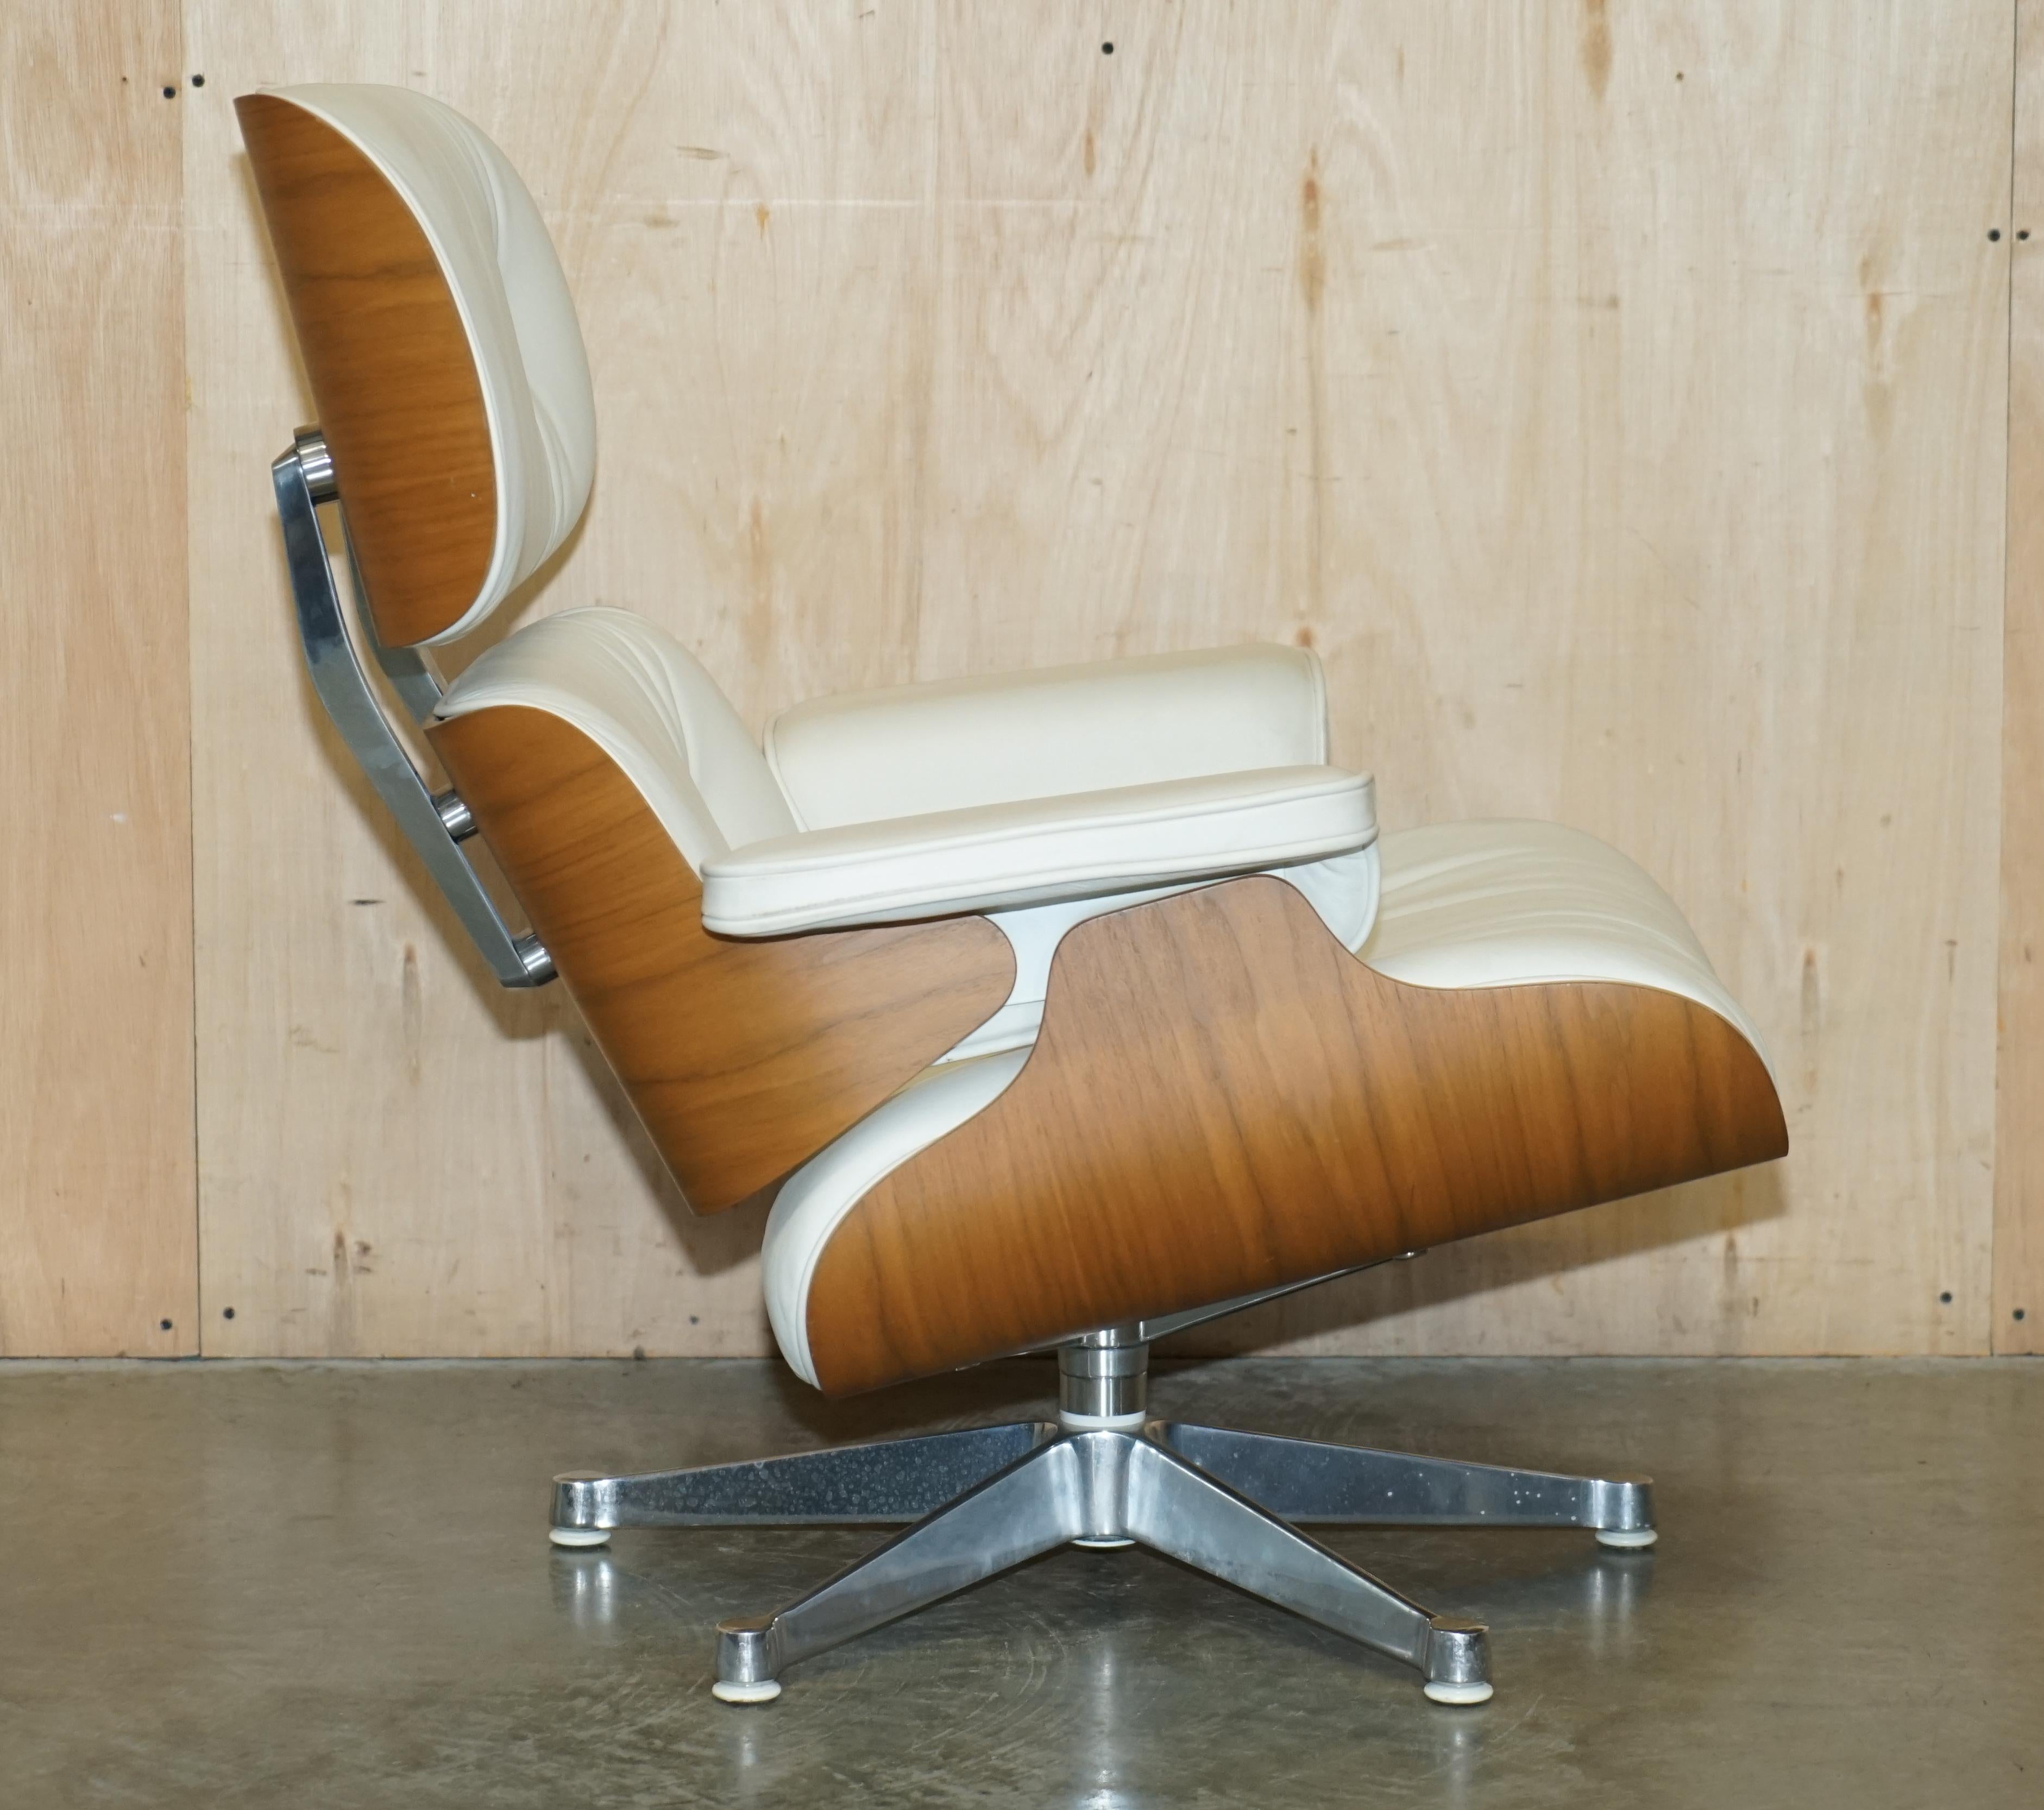 Whiting fauteuil de salon Charles and Ray Eames american cherry wood white leather en vente 10